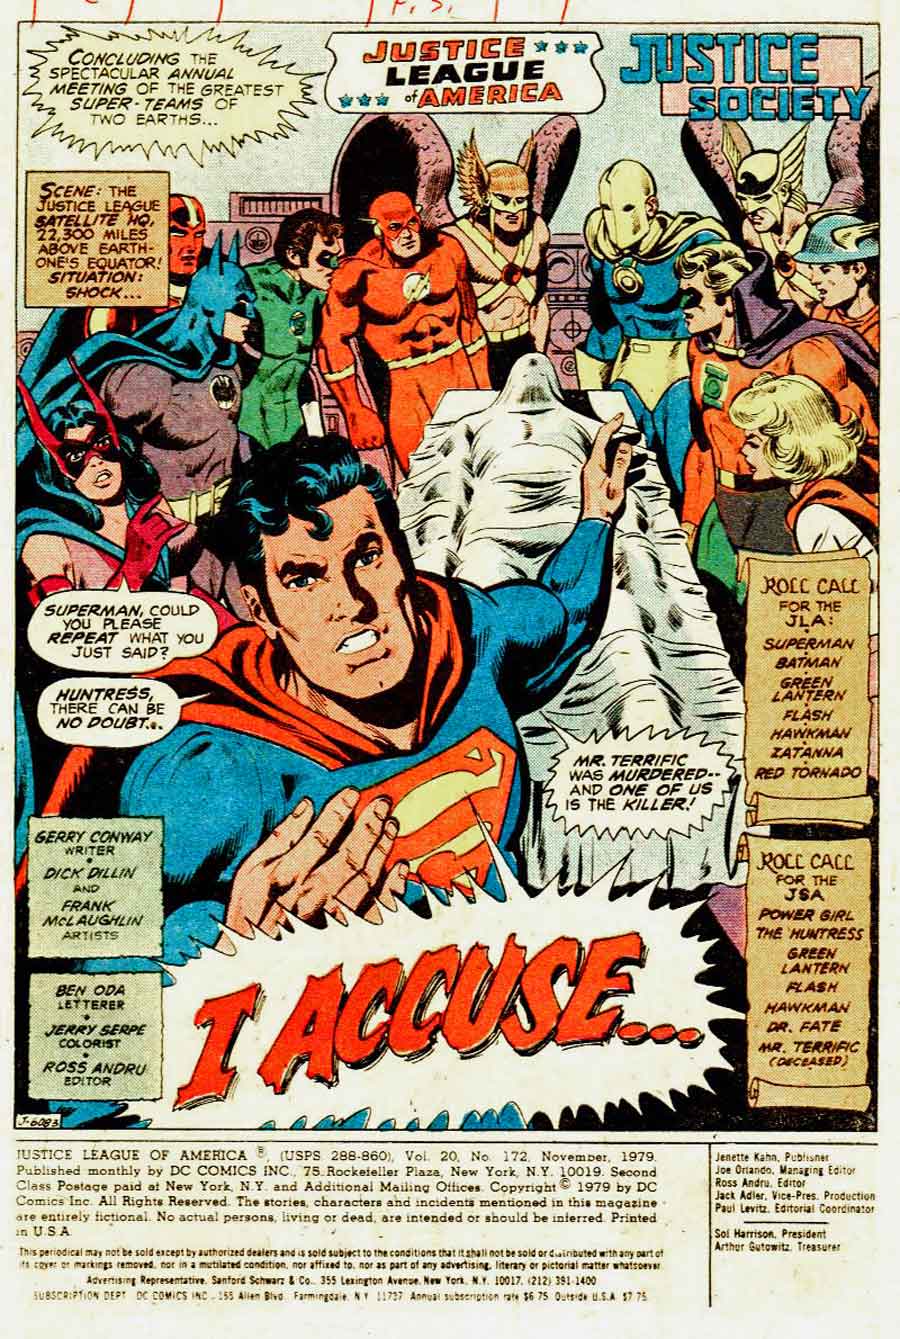 Justice League of America #172 by Gerry Conway, Dick Dillin, and Frank McLaughlin